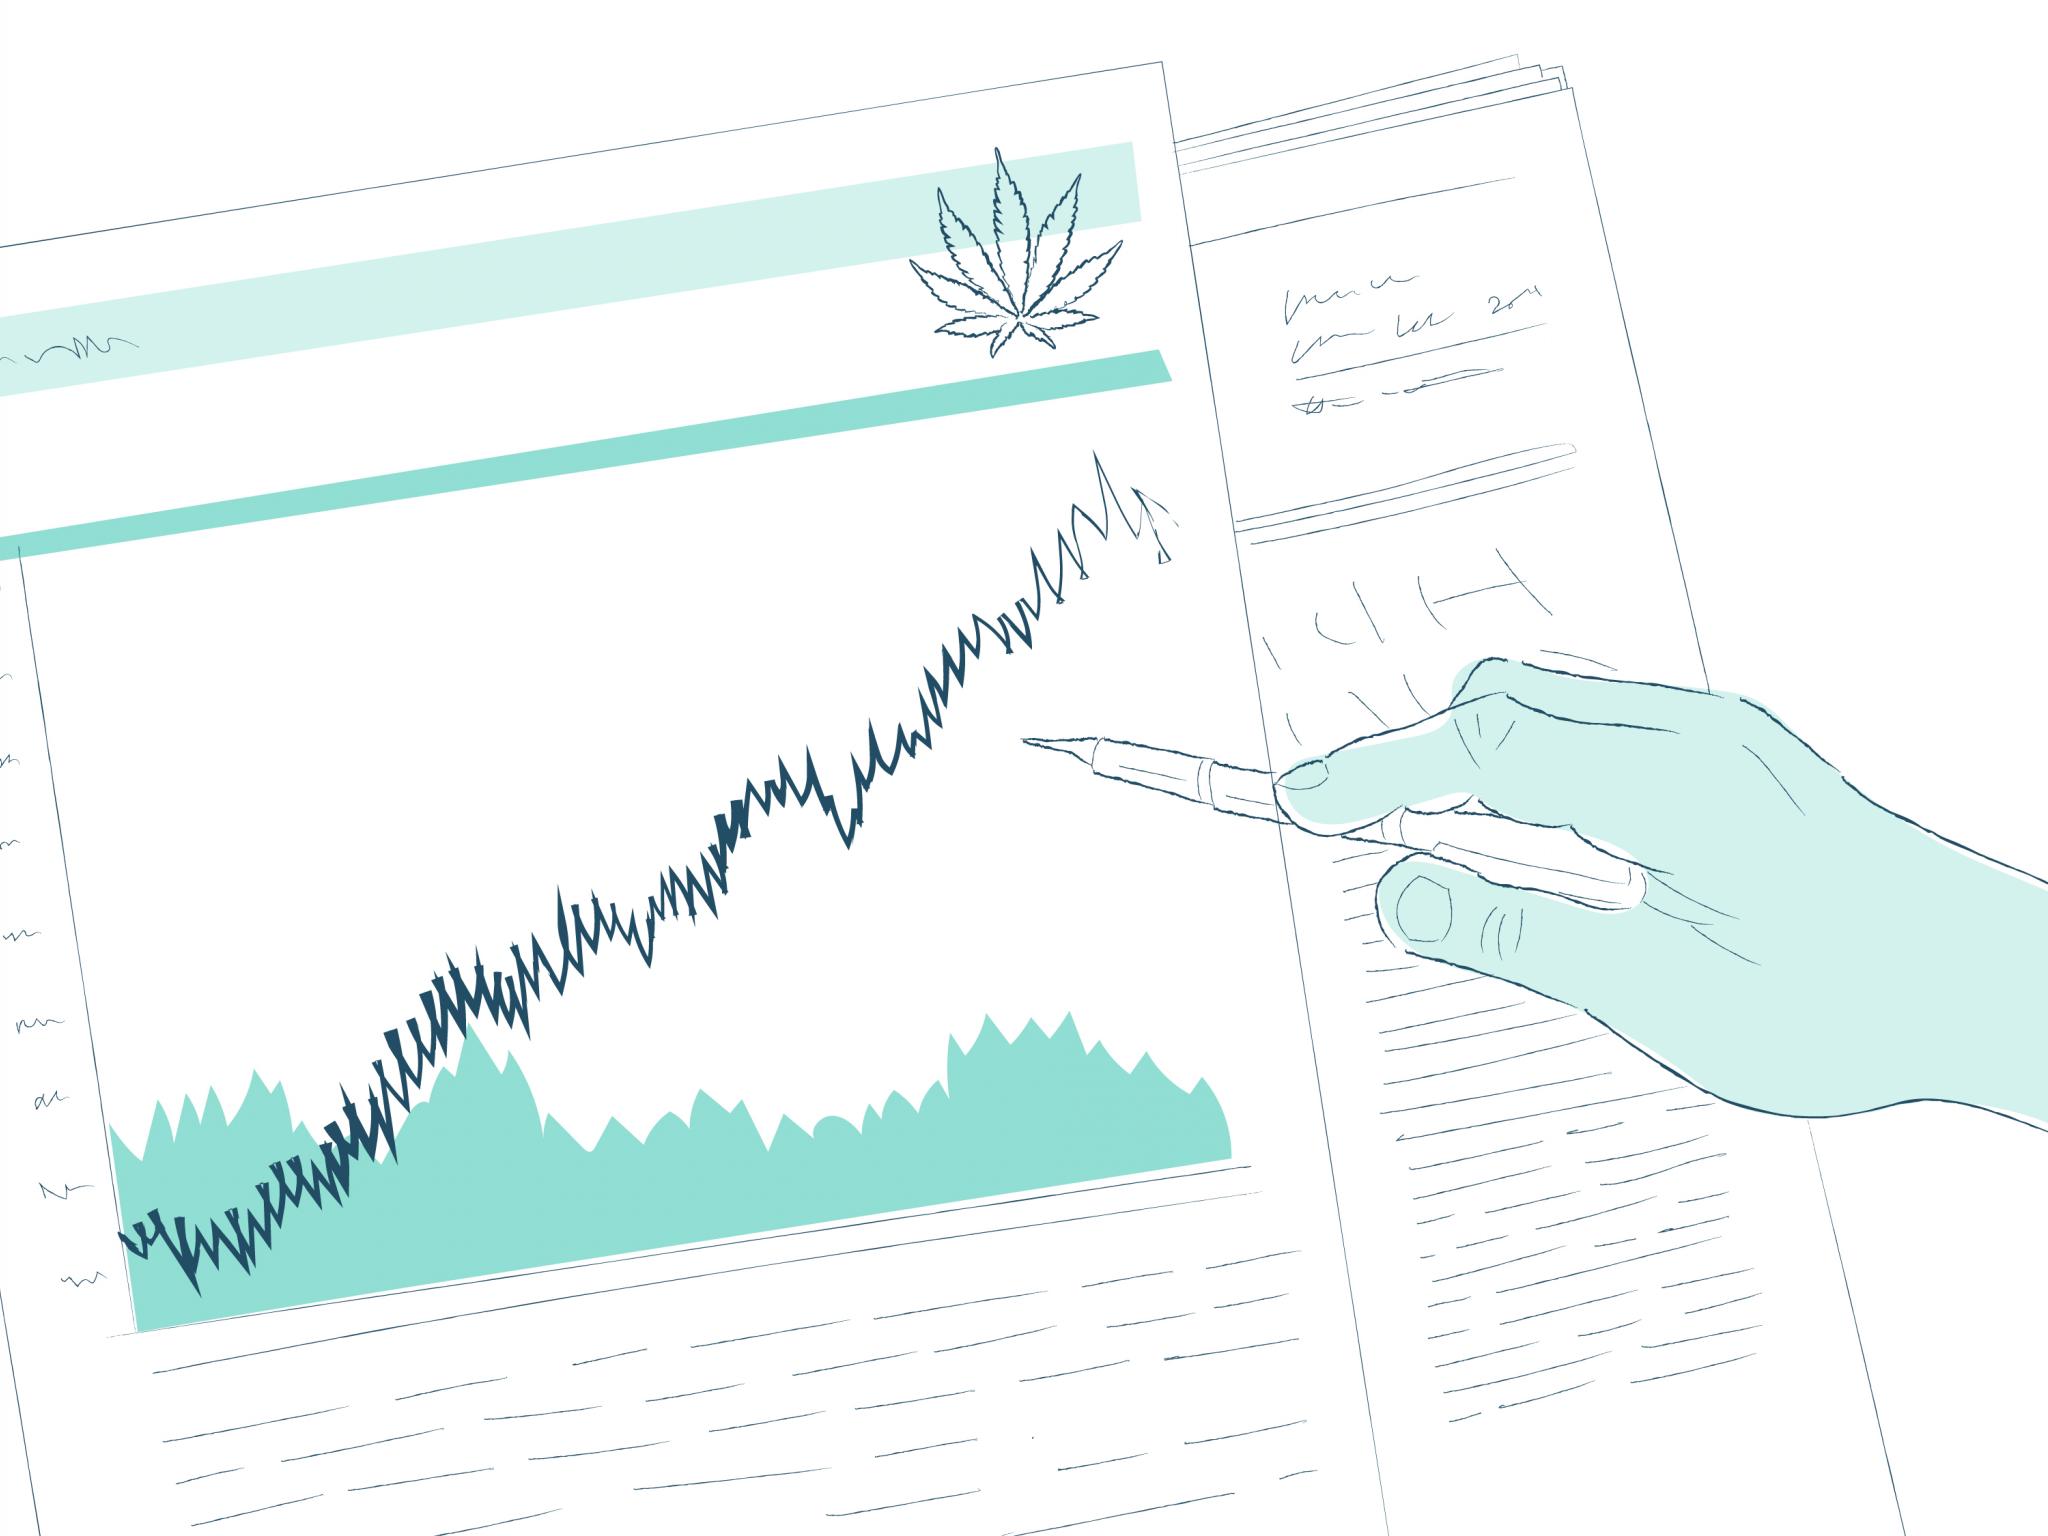  cannabis-stock-gainers-and-losers-from-may-26-2021 